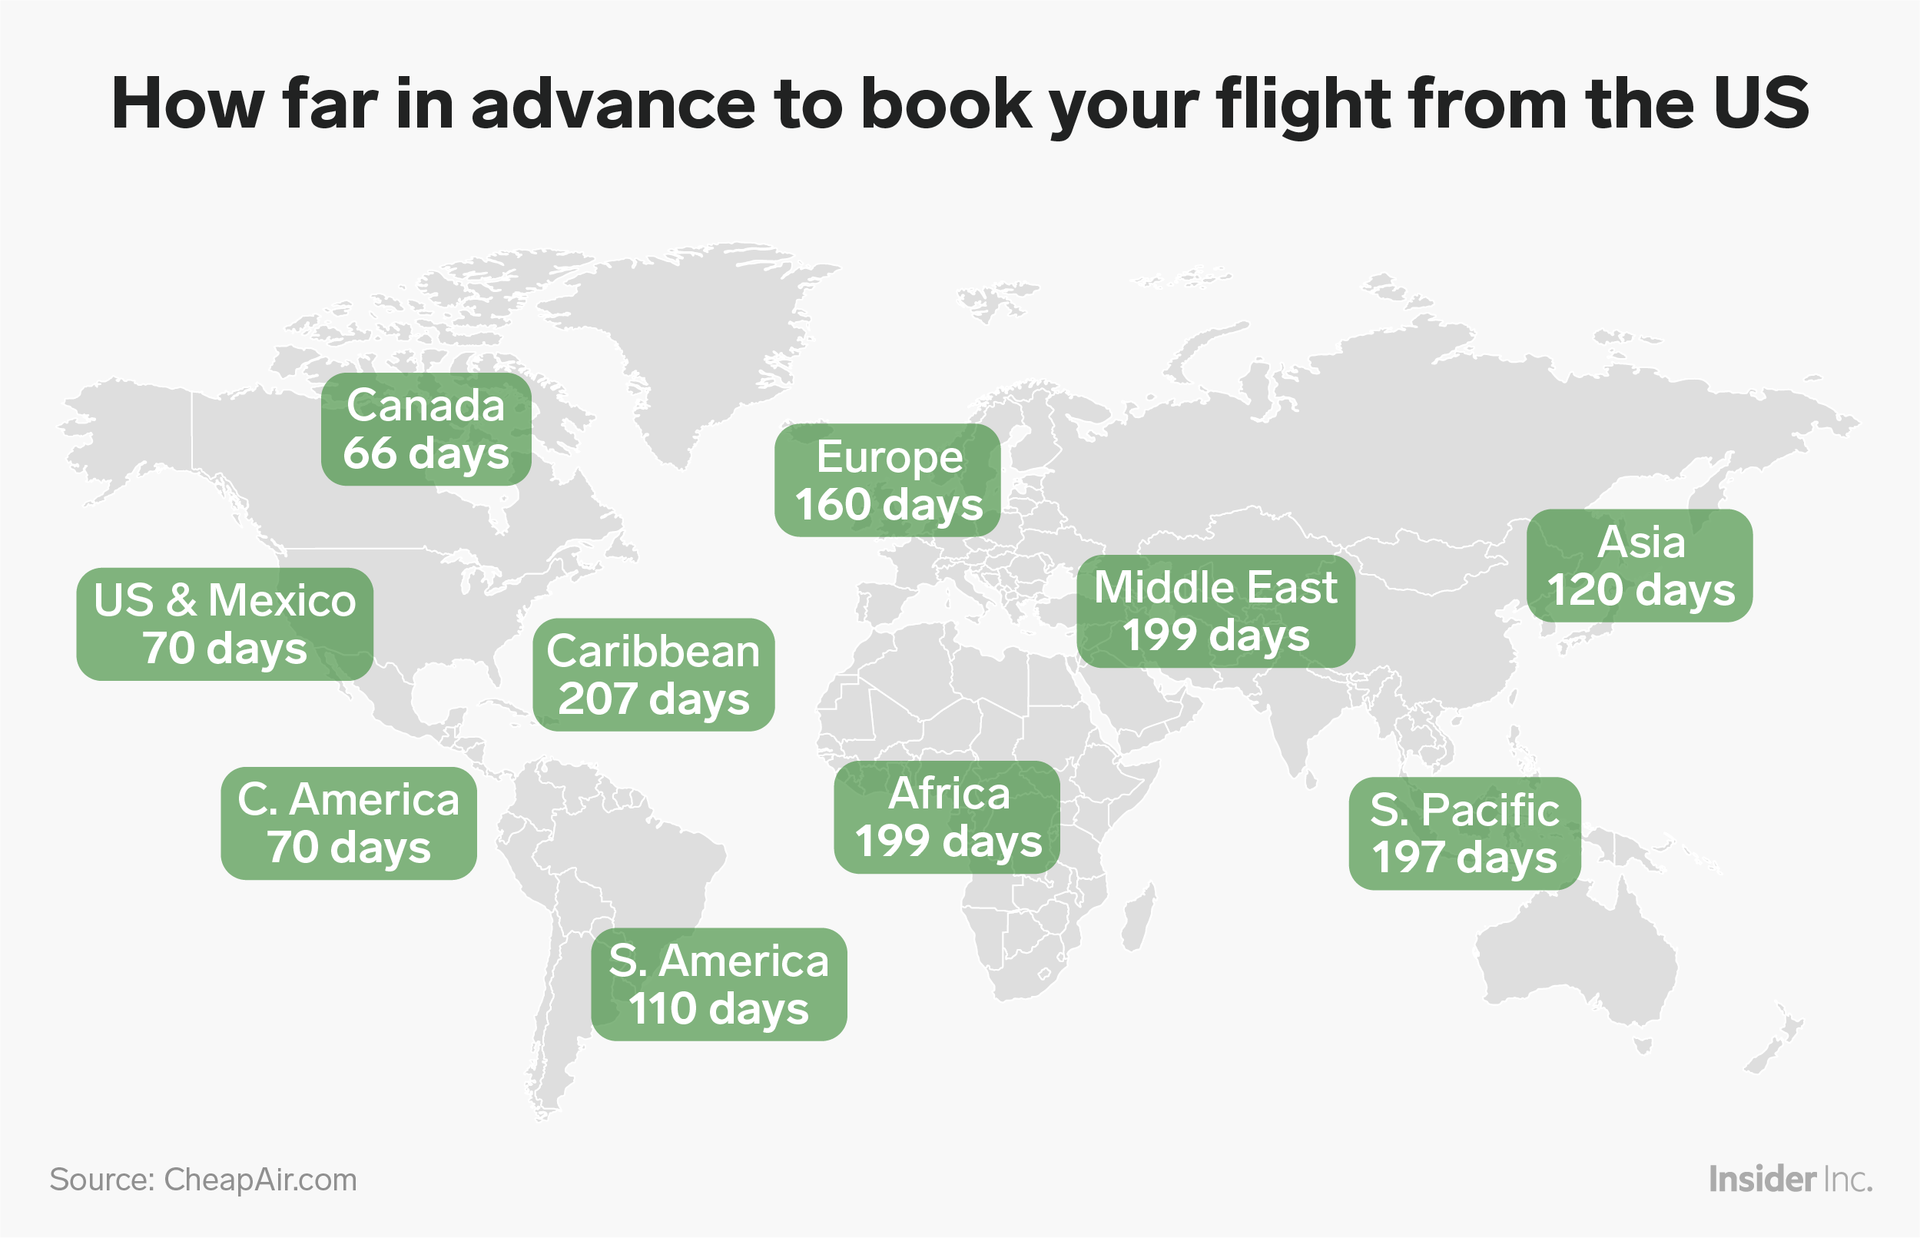 The best time to book flights to just about anywhere in the world